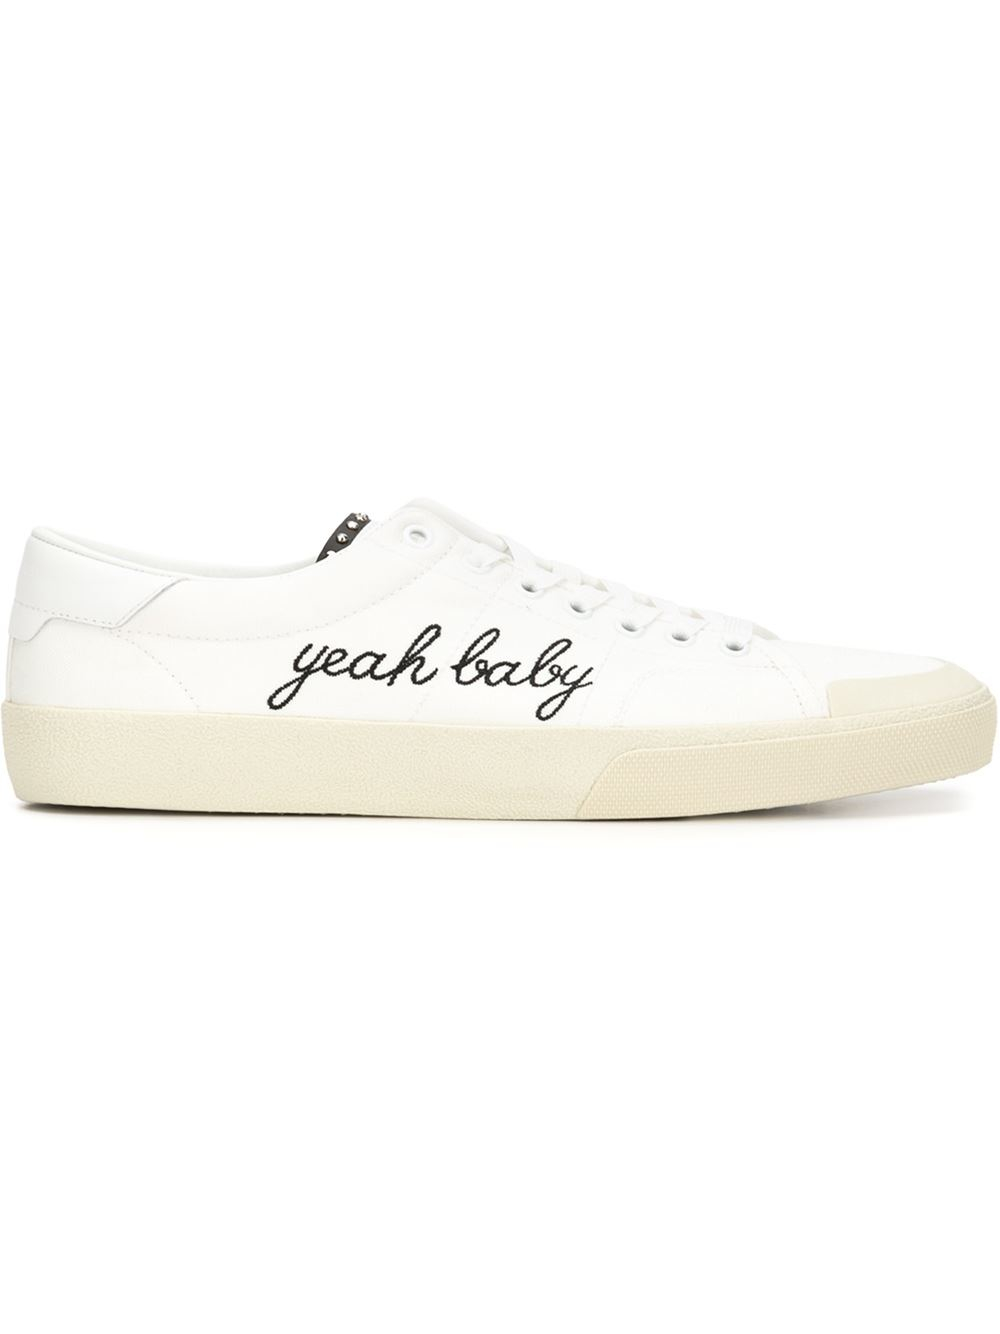 Yeah Baby Sneakers in White for Men - Lyst